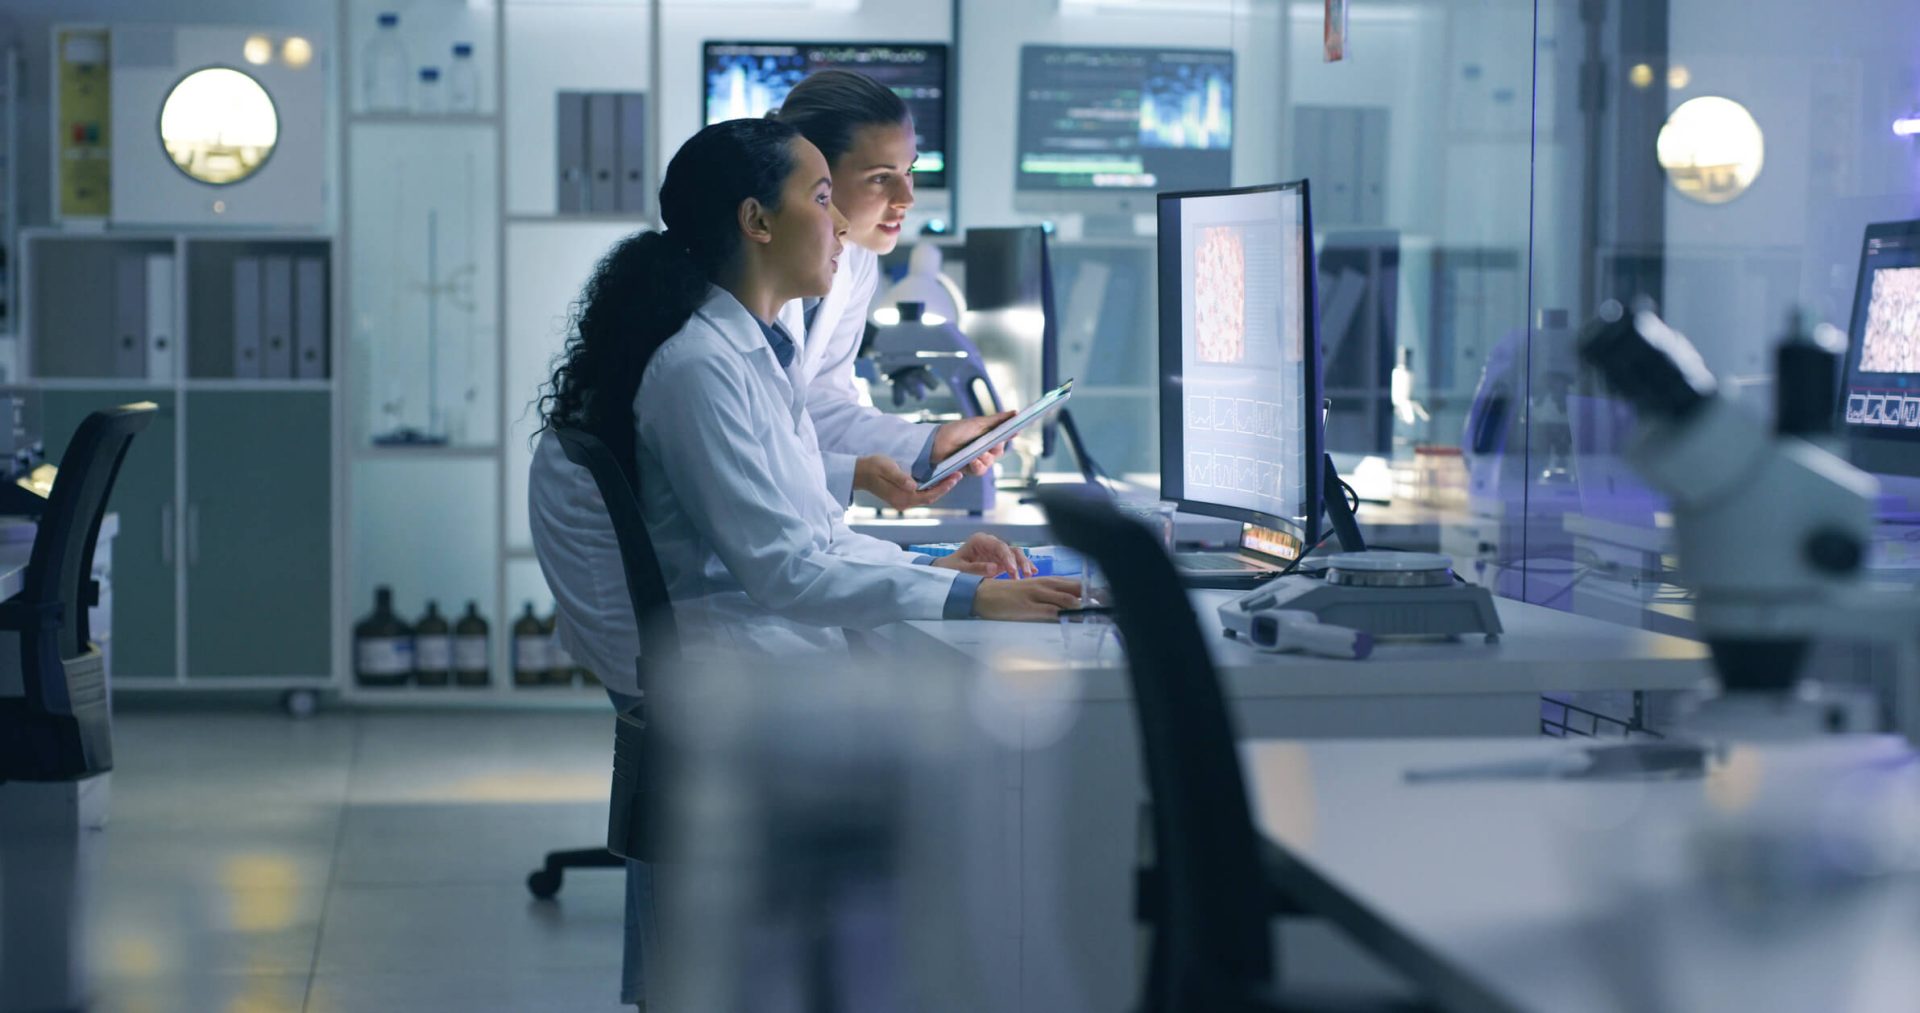 Two women in lab coats observing a computer screen